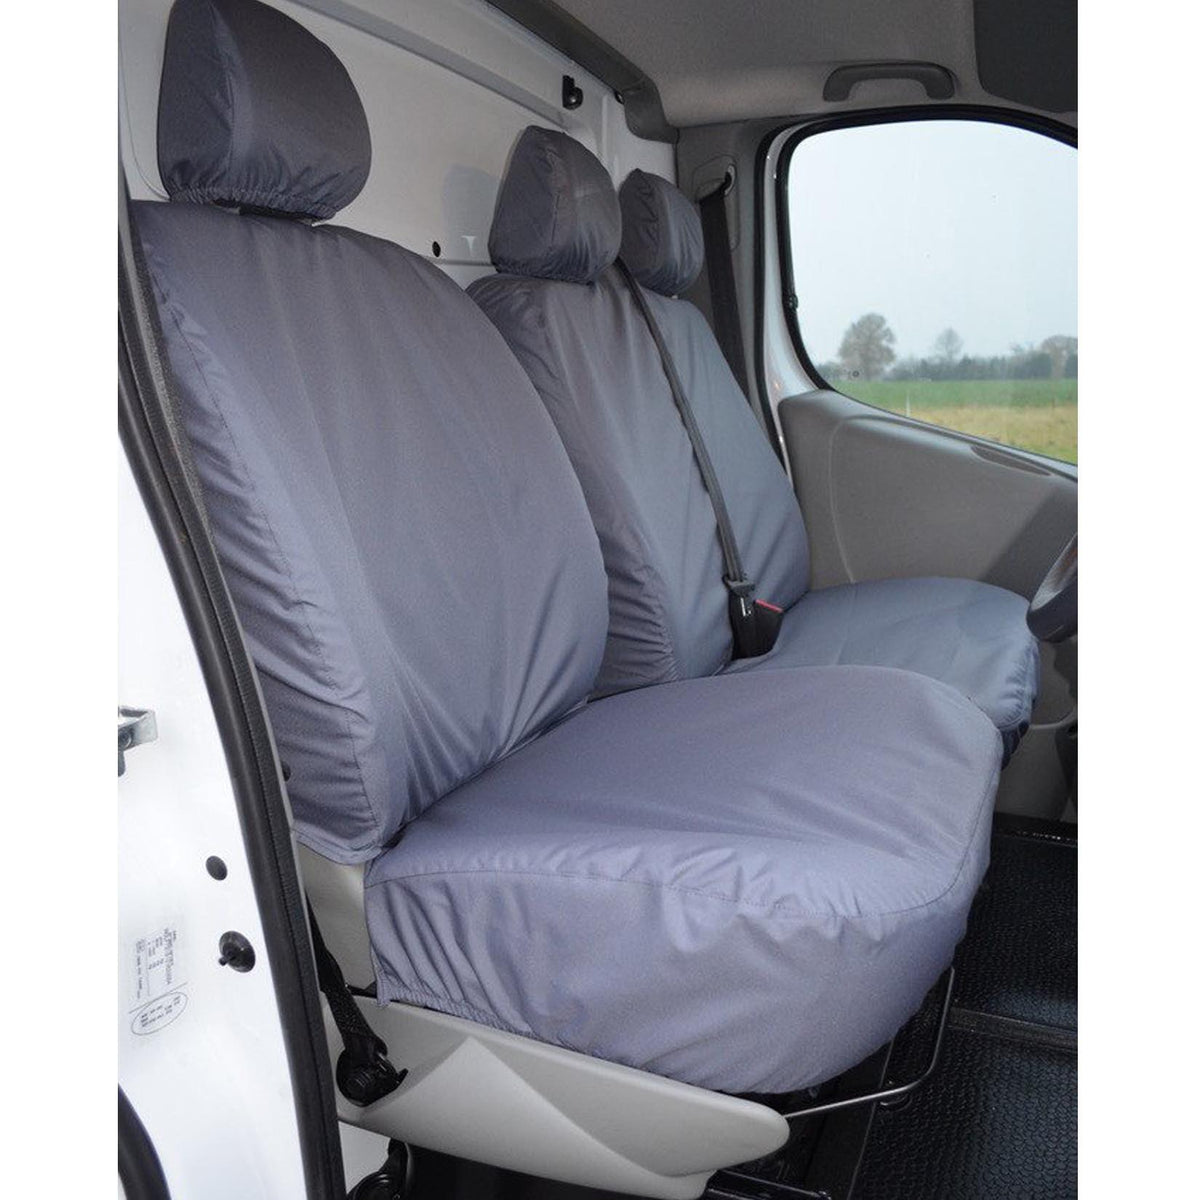 NISSAN PRIMASTAR 2006-2014 DRIVER AND FRONT DOUBLE PASSENGER (NO ARMREST) SEAT COVERS - GREY - Storm Xccessories2